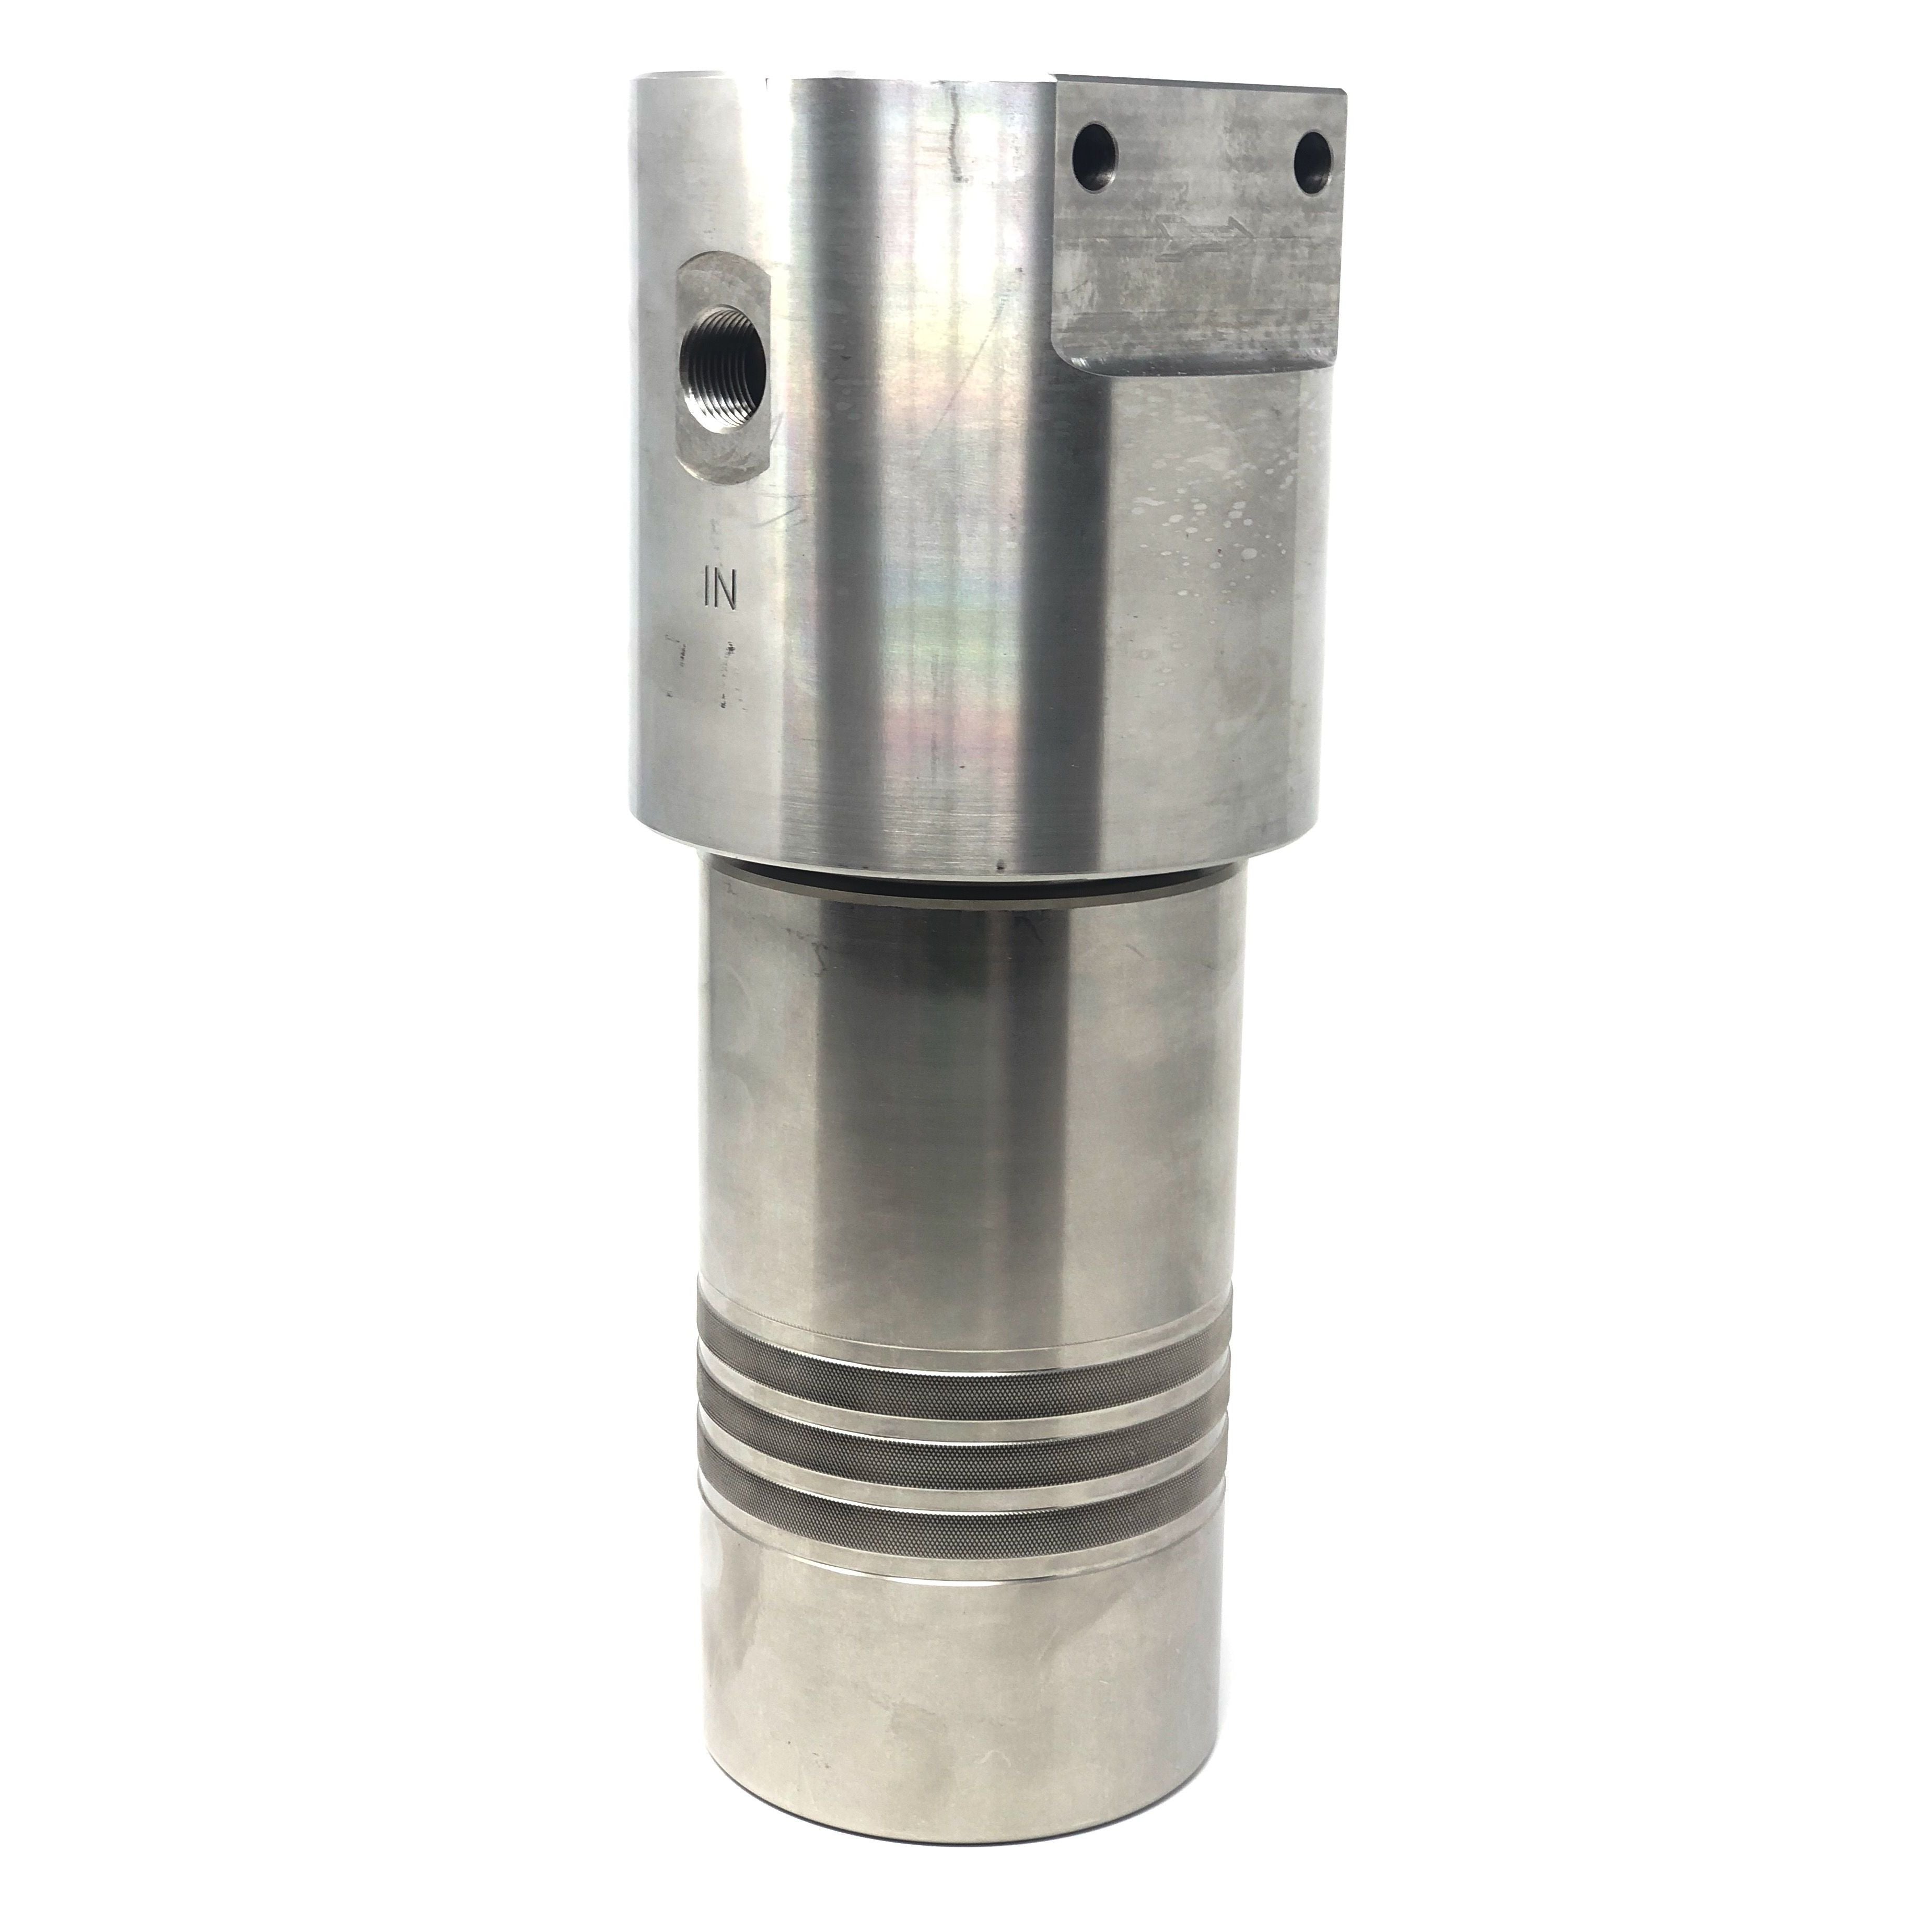 52S-244N-10SEN : Chase Ultra High Pressure Inline Filter, 10000psi, 1/4" NPT, 10 Micron, With Visual Indicator, No Bypass